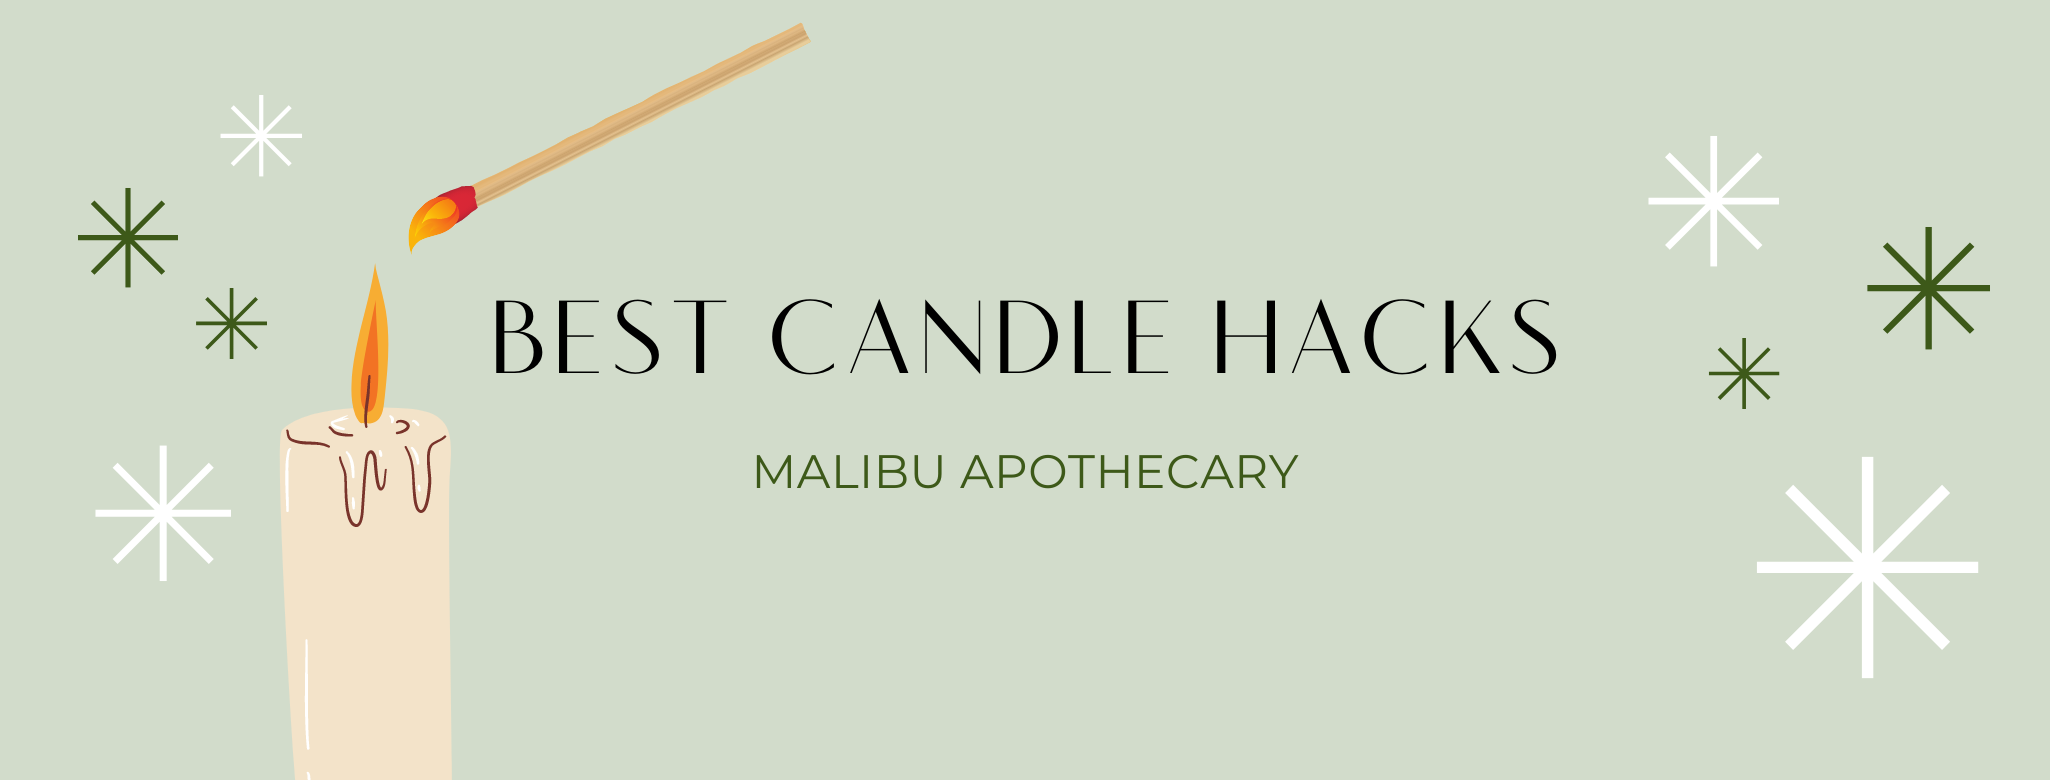 4 Ways to Add Scent to a Candle - wikiHow